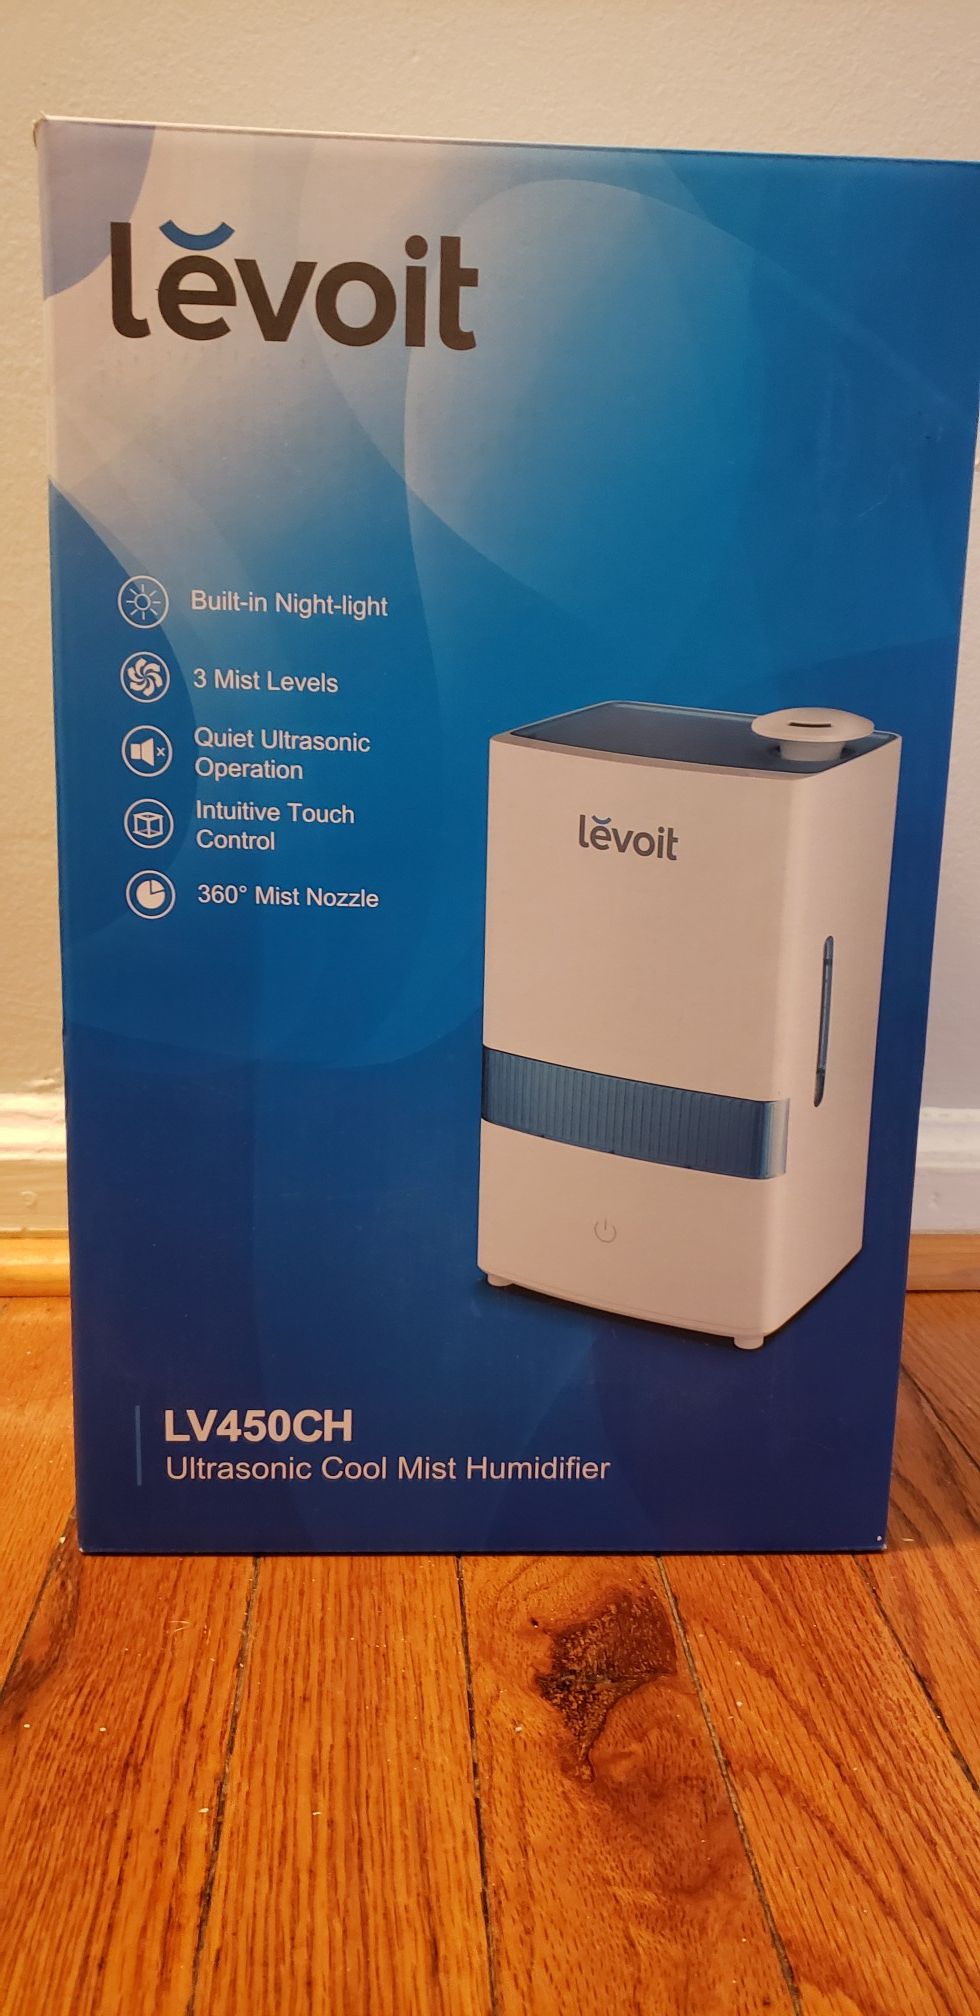 NEW Levoit cool mist humidifier LV450CH